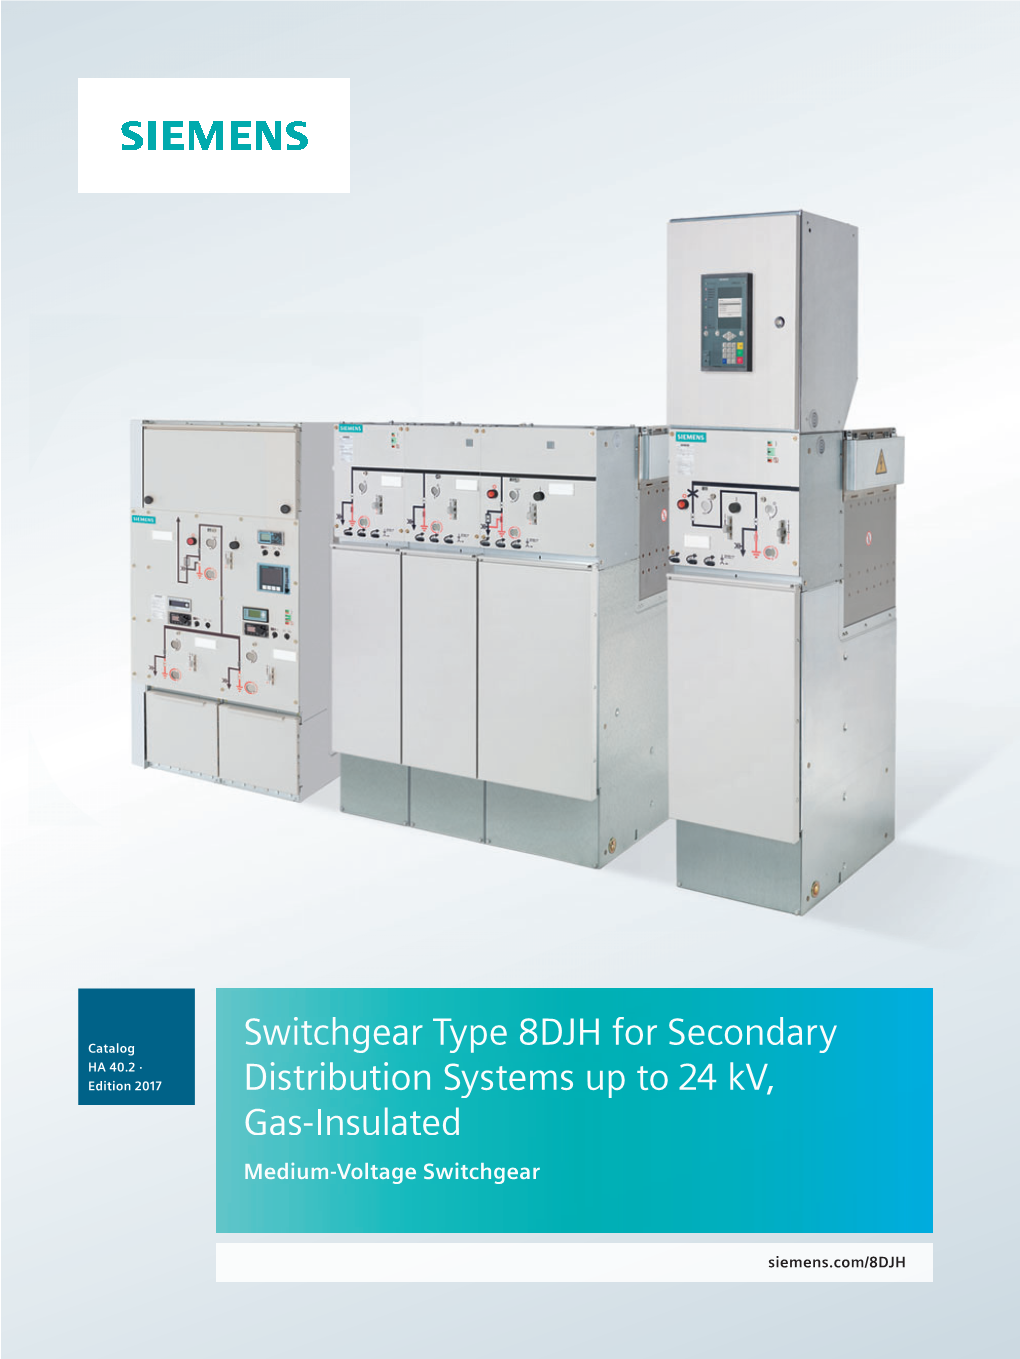 Switchgear Type 8DJH for Secondary Distribution Systems up to 24 Kv, Gas-Insulated · Siemens HA 40.2 · 2017 Contents